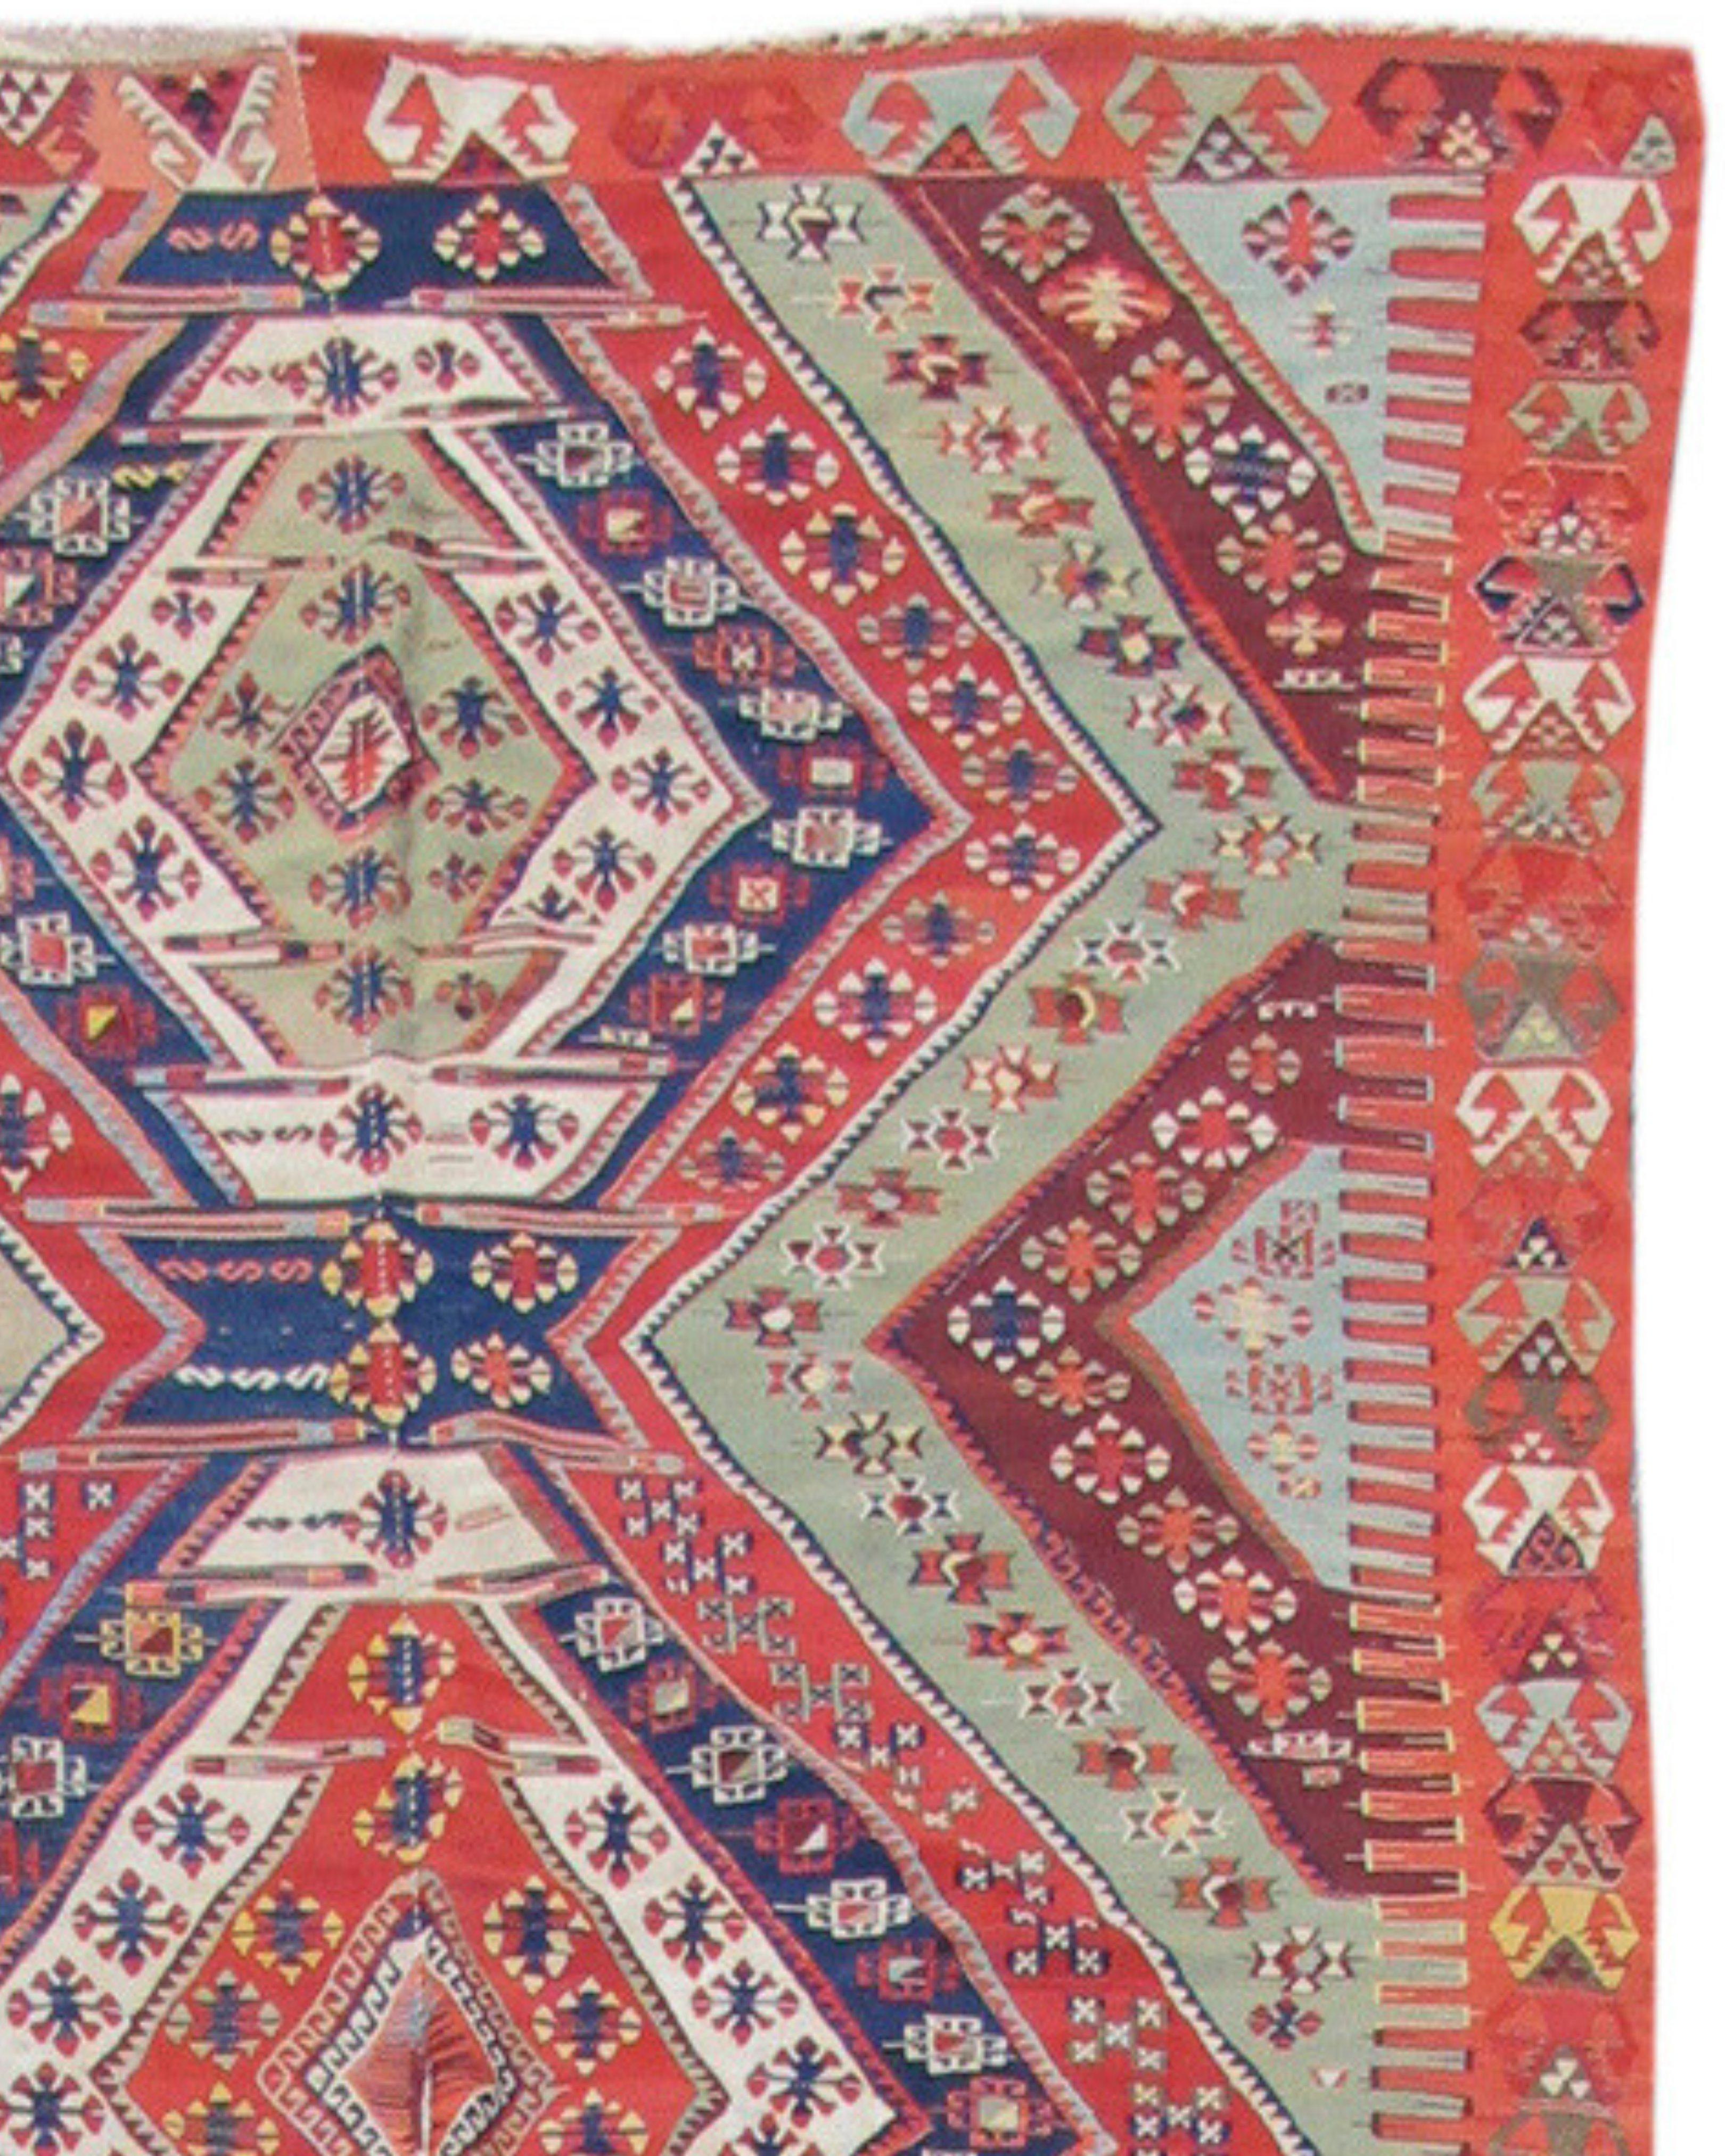 Antique Multi-Colored Anatolian Kilim Rug, Mid-19th Century 

This Reyhanli Kilim from the Kurdish region of Southeastern Anatolia is woven with a rainbow of colors. There are several distinct shades of blues, greens, reds and orange. Indeed, the